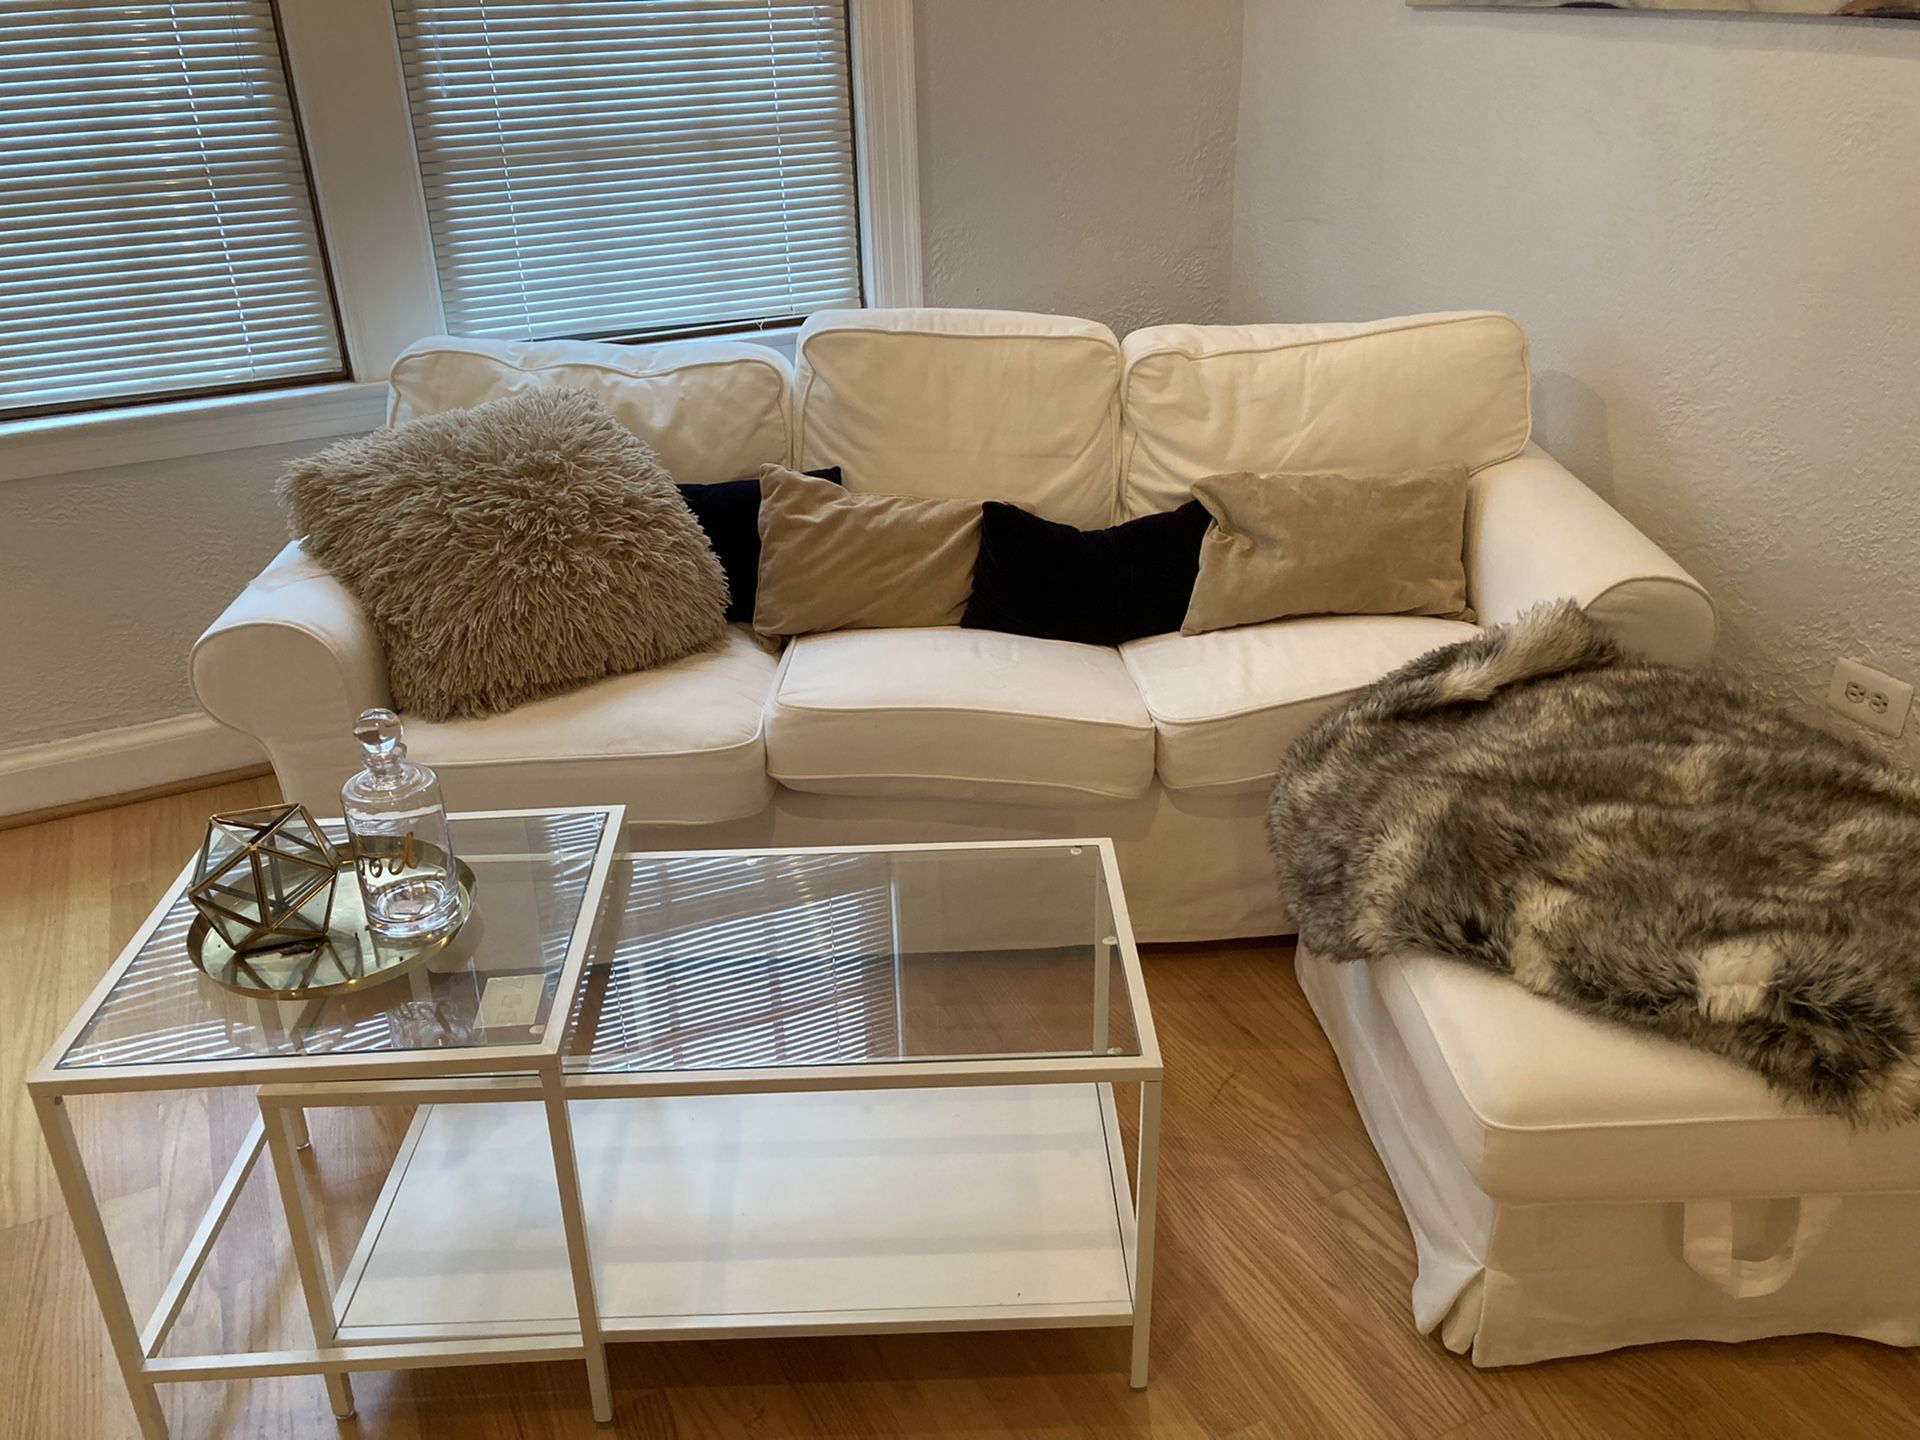 White IKEA couch and storage ottoman